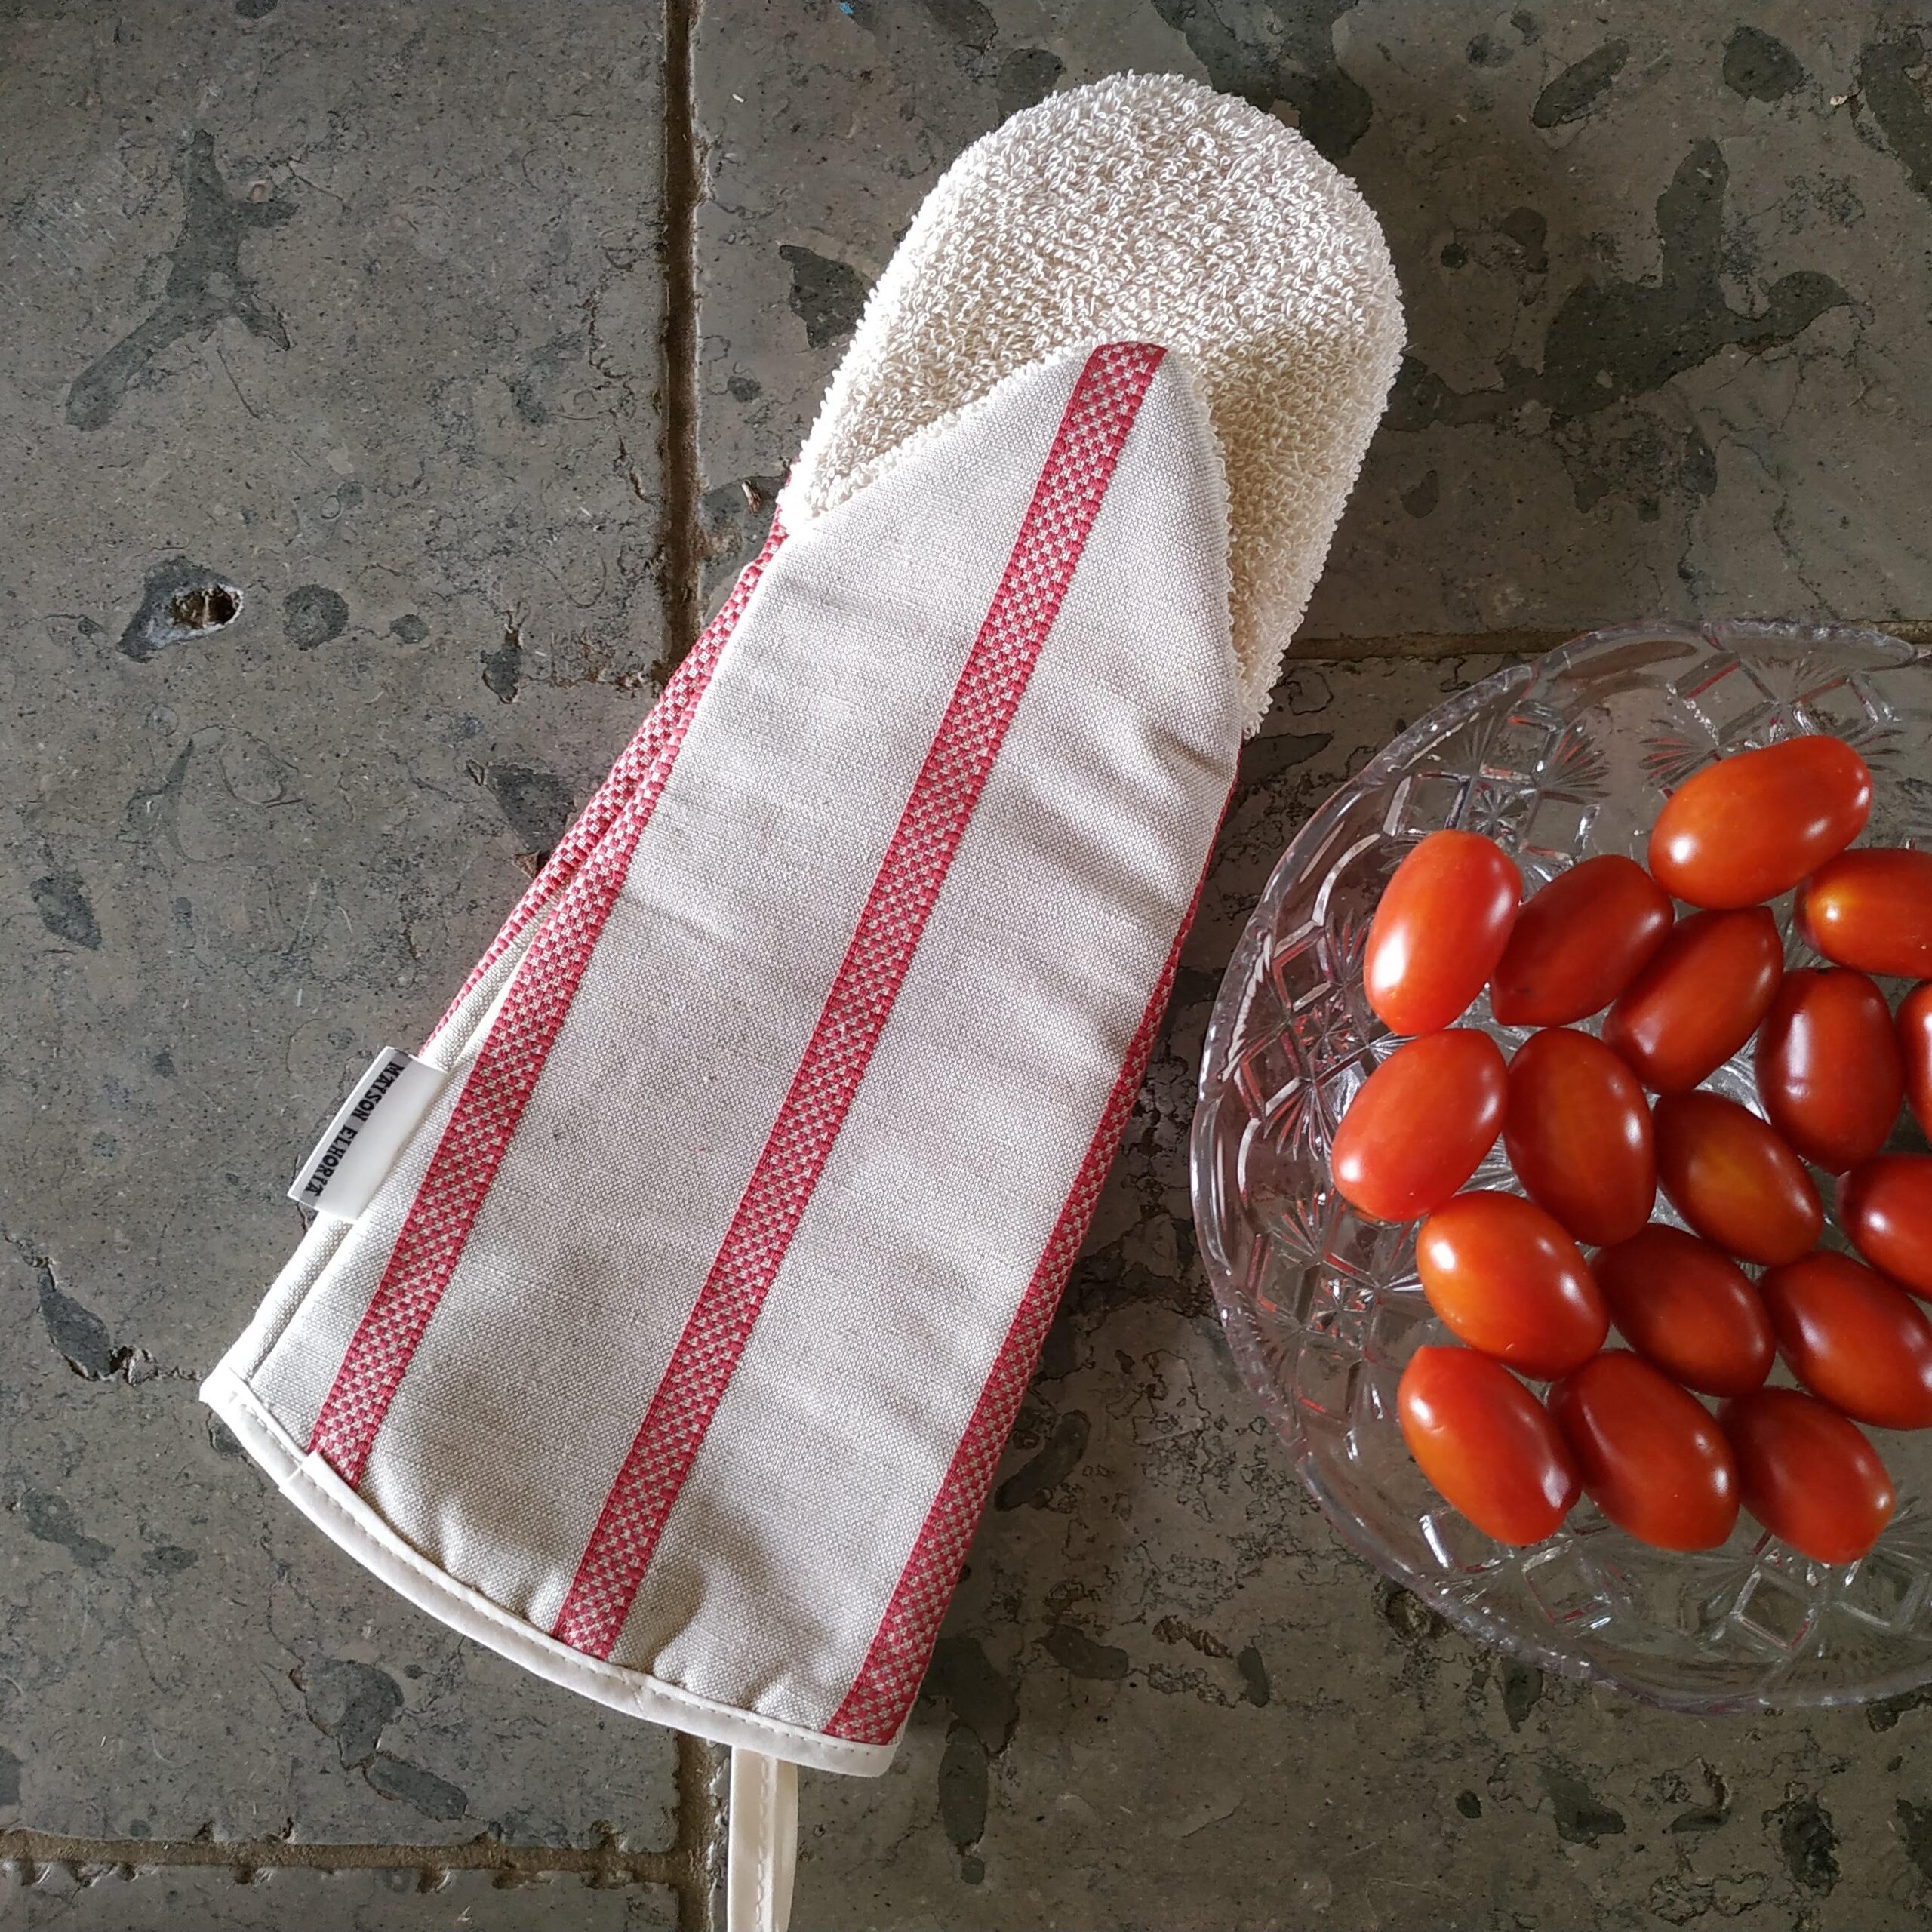 Red stripes gauntlet oven glove on grey stone with a bowl of cherry tomatoes